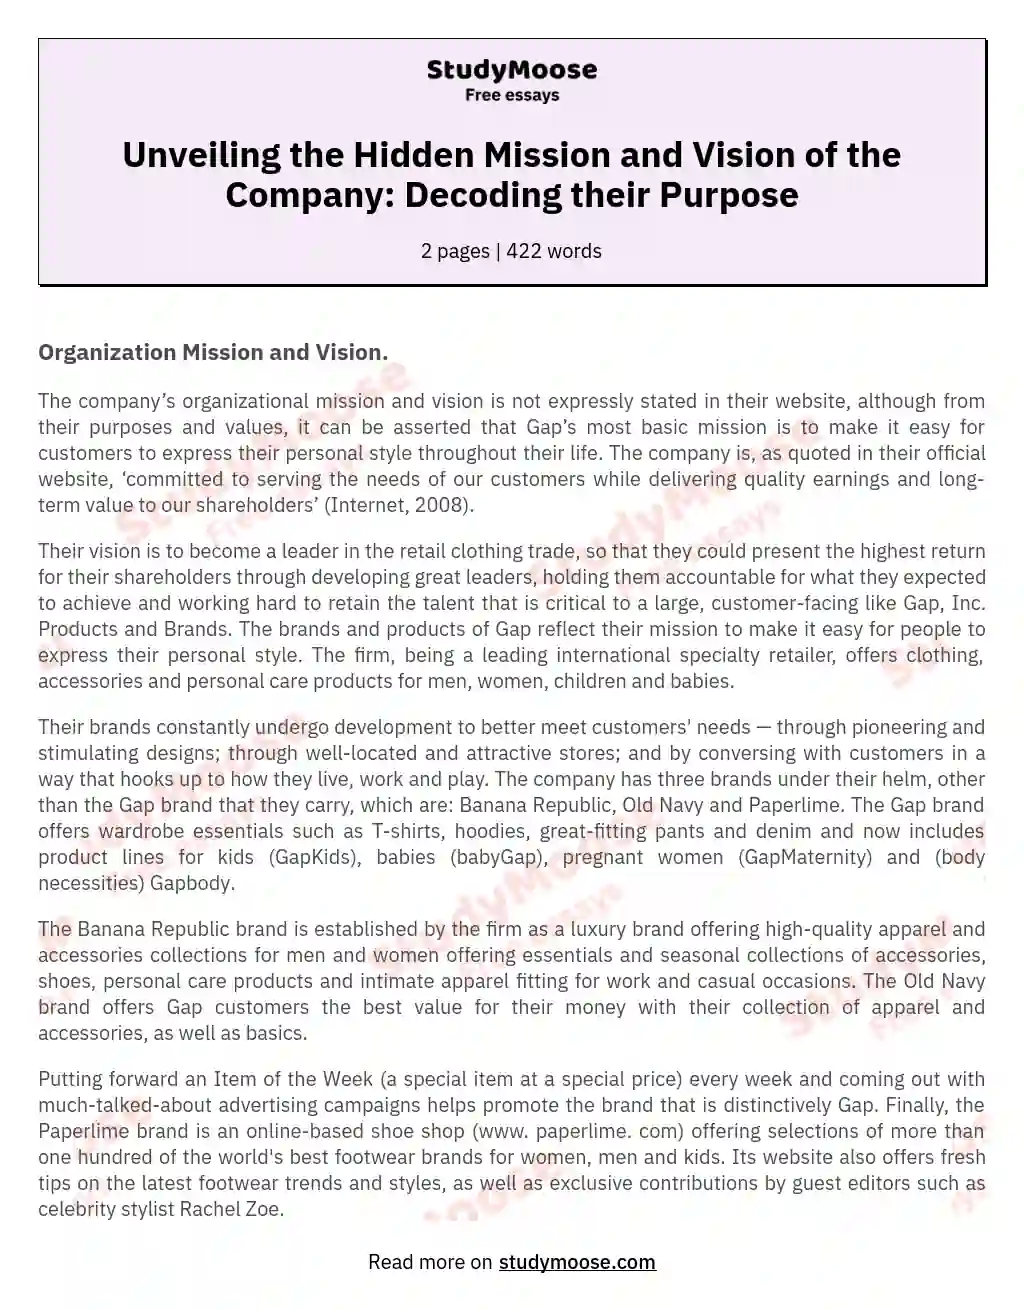 Unveiling the Hidden Mission and Vision of the Company: Decoding their Purpose essay